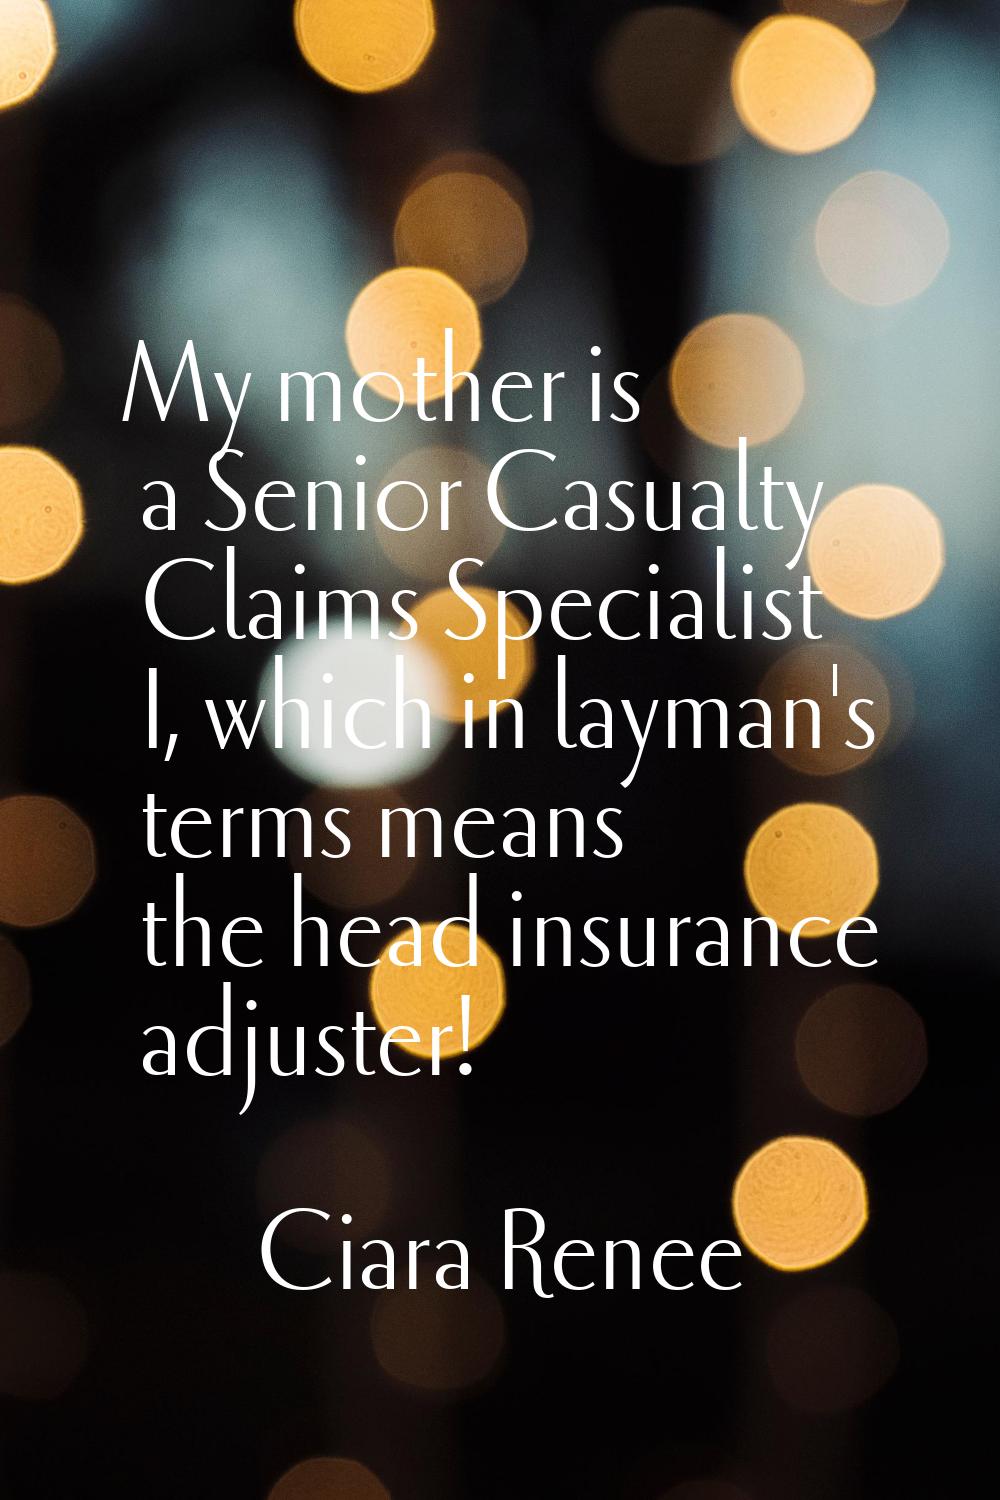 My mother is a Senior Casualty Claims Specialist I, which in layman's terms means the head insuranc